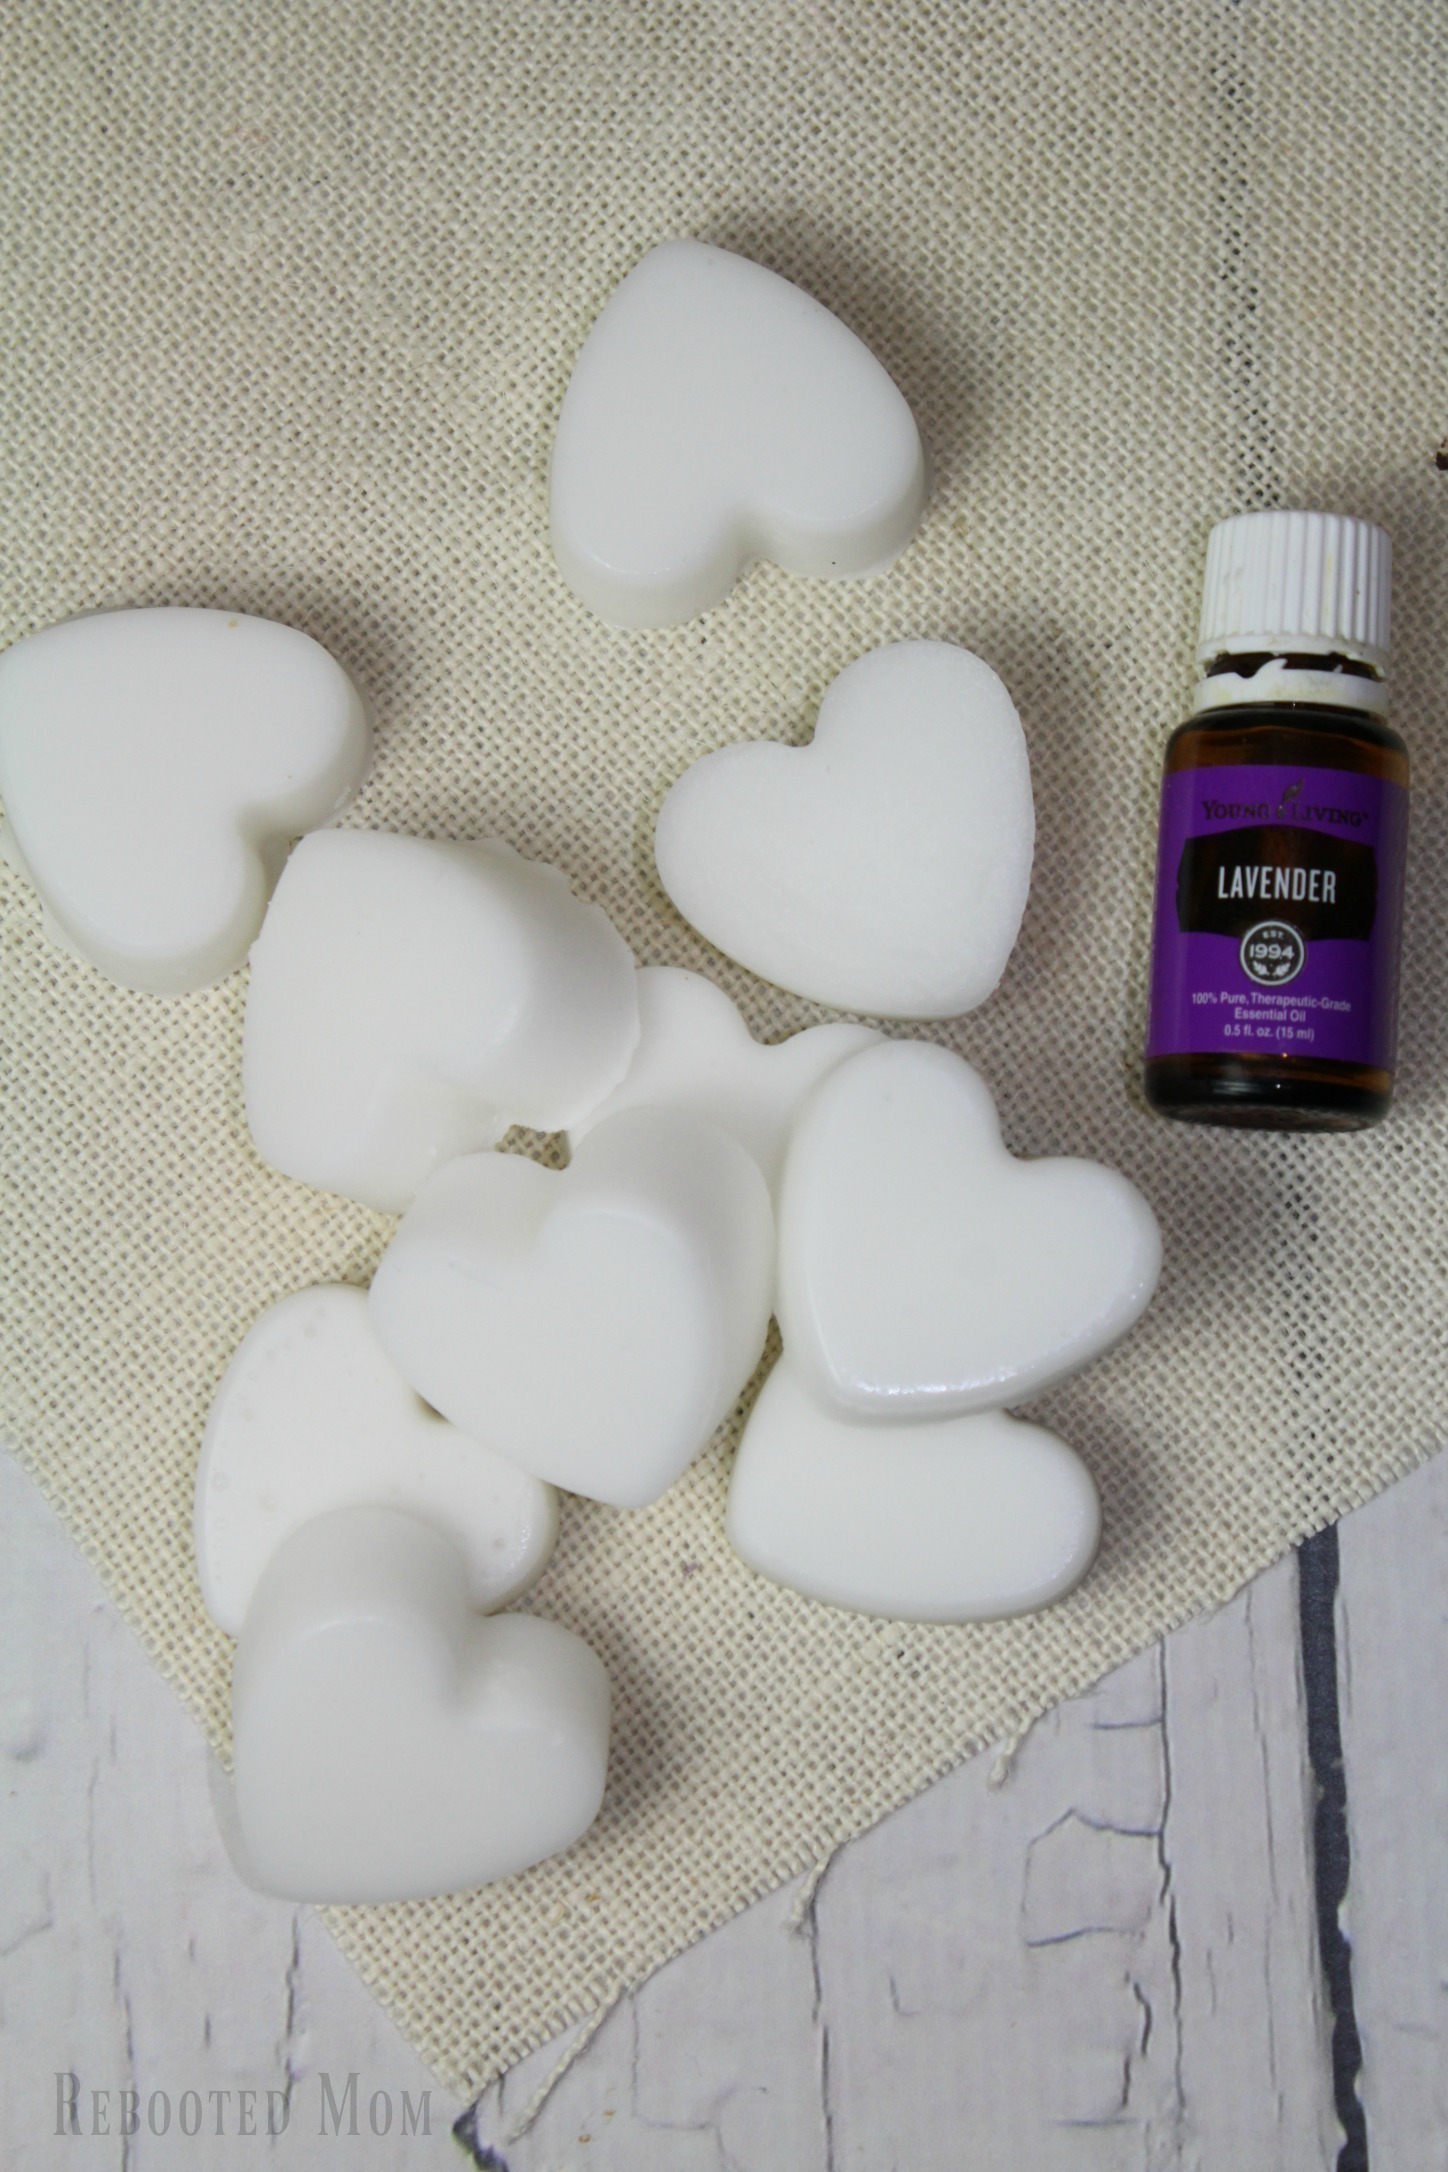 These Lavender Coconut Oil Bath Melts are an easy, and inexpensive way to moisturize dry skin.